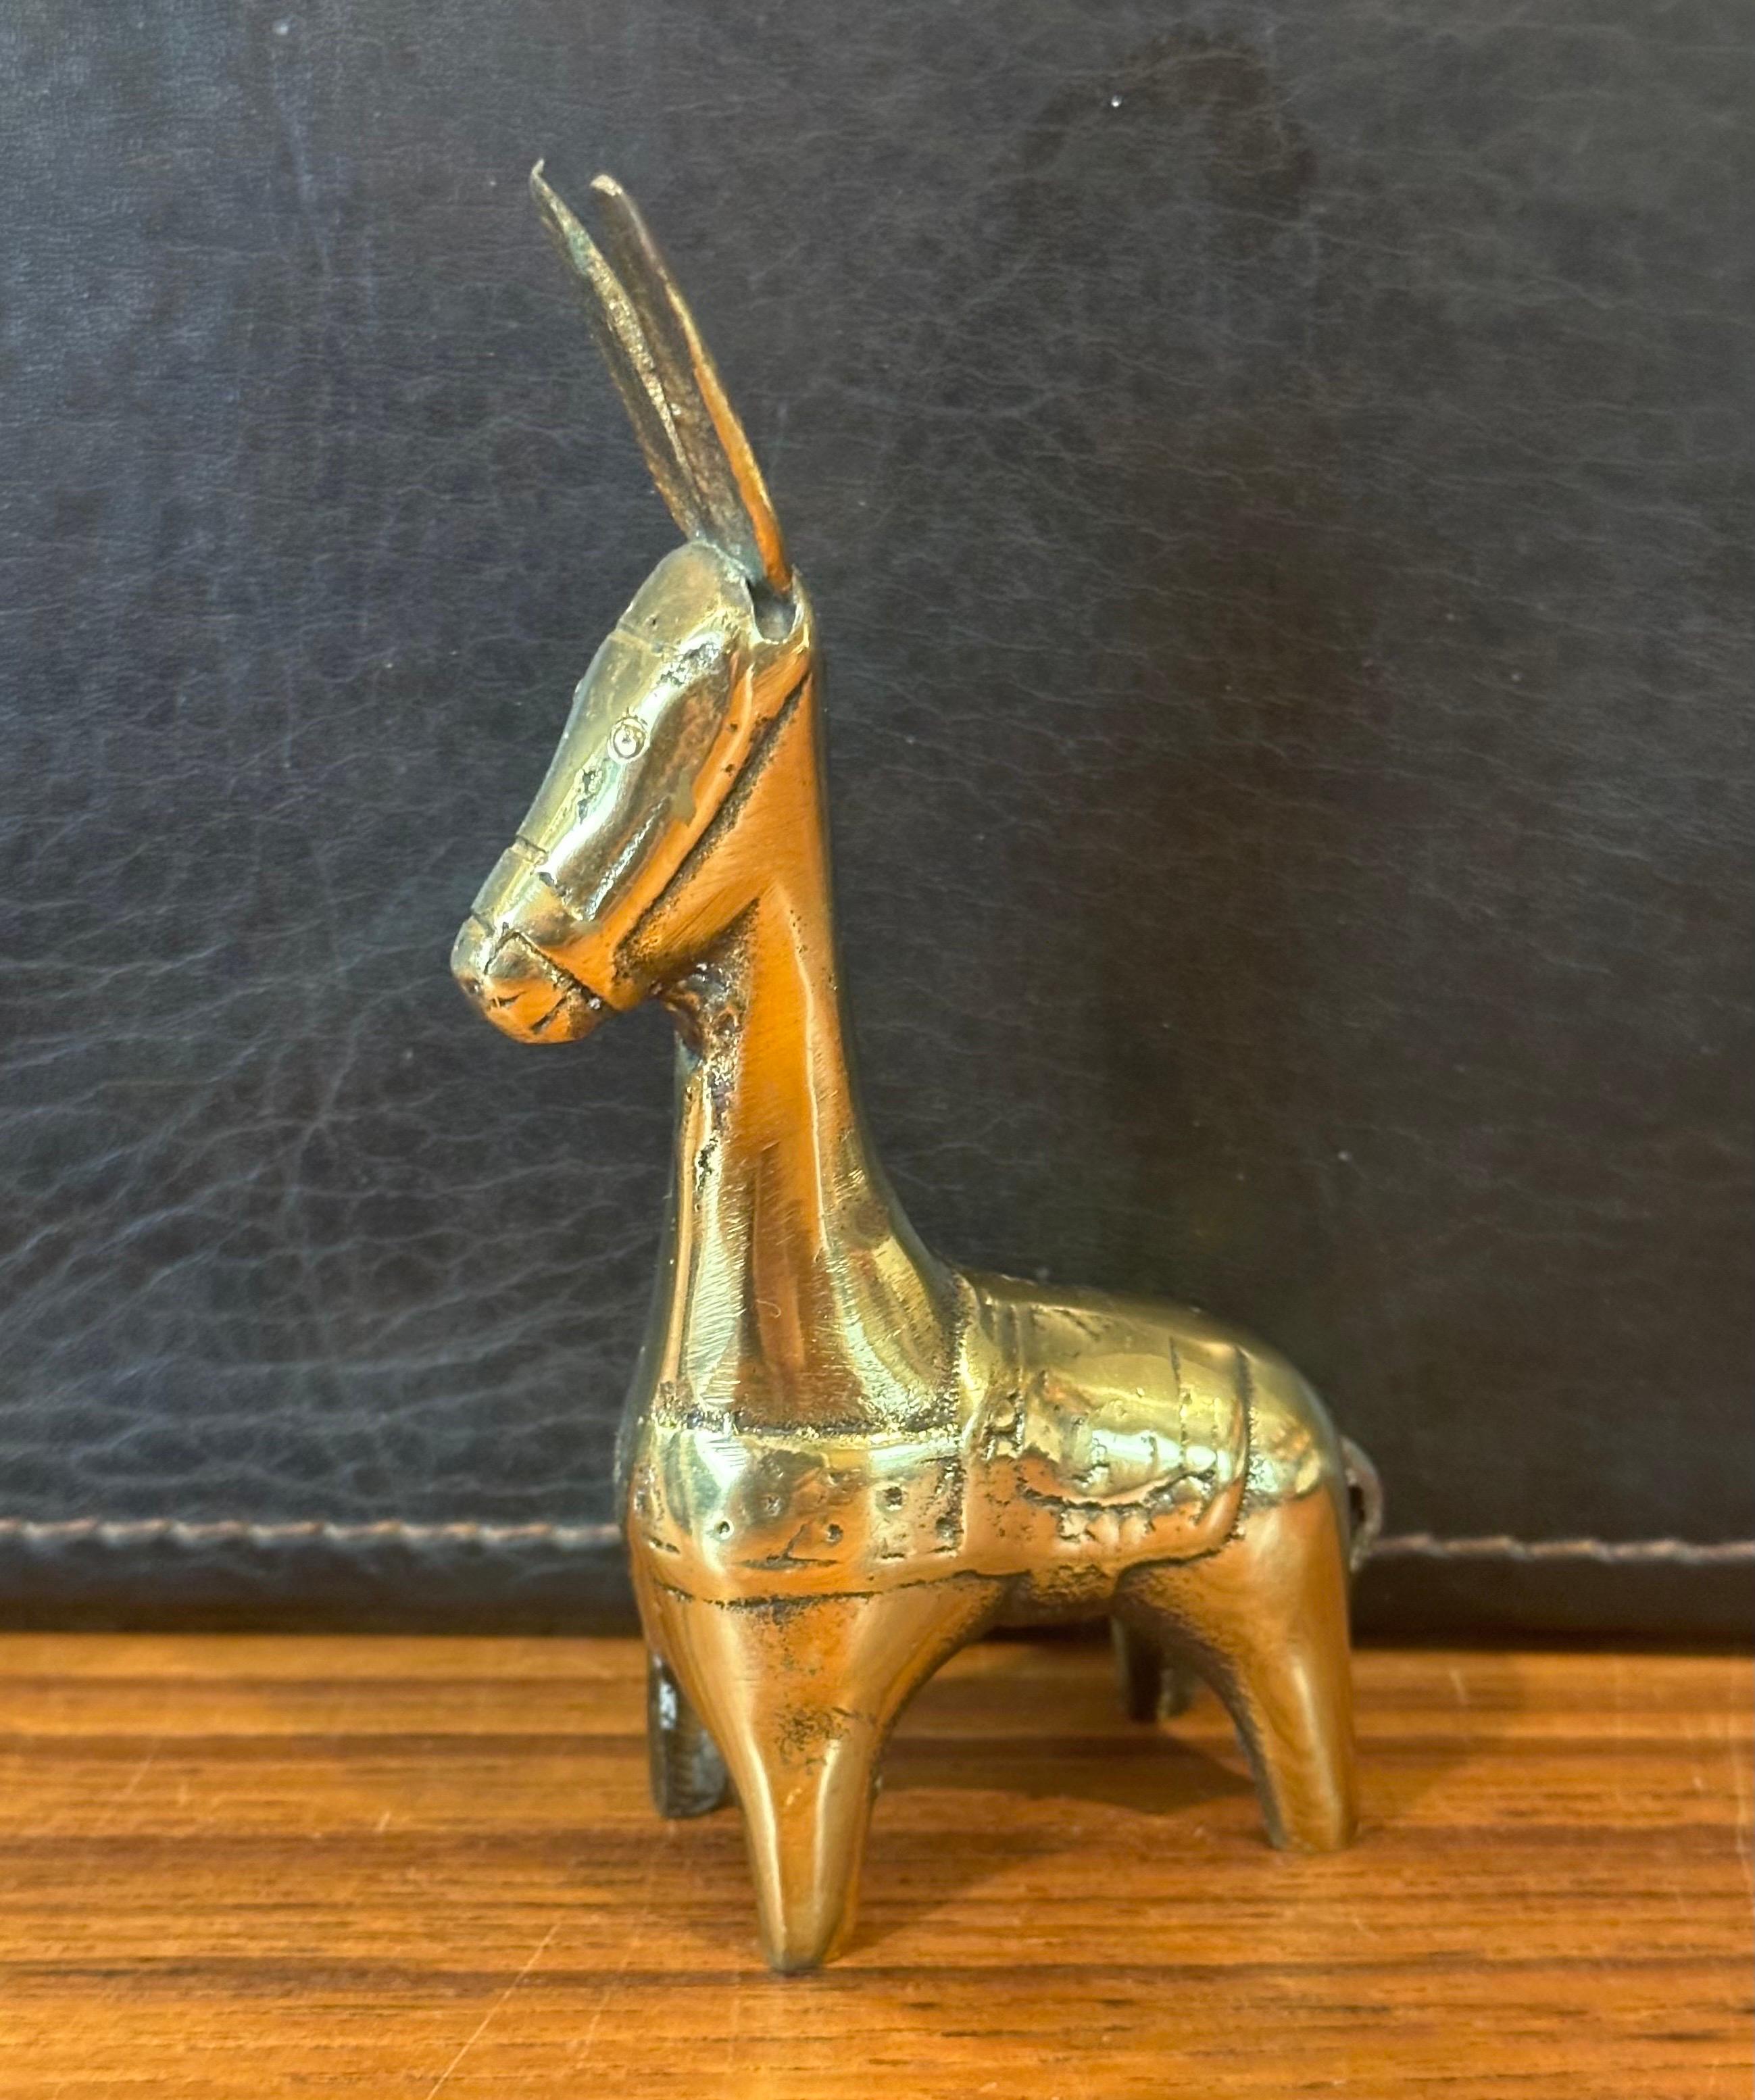 20th Century Vintage Italian Brass Donkey / Burro Paperweight or Sculpture